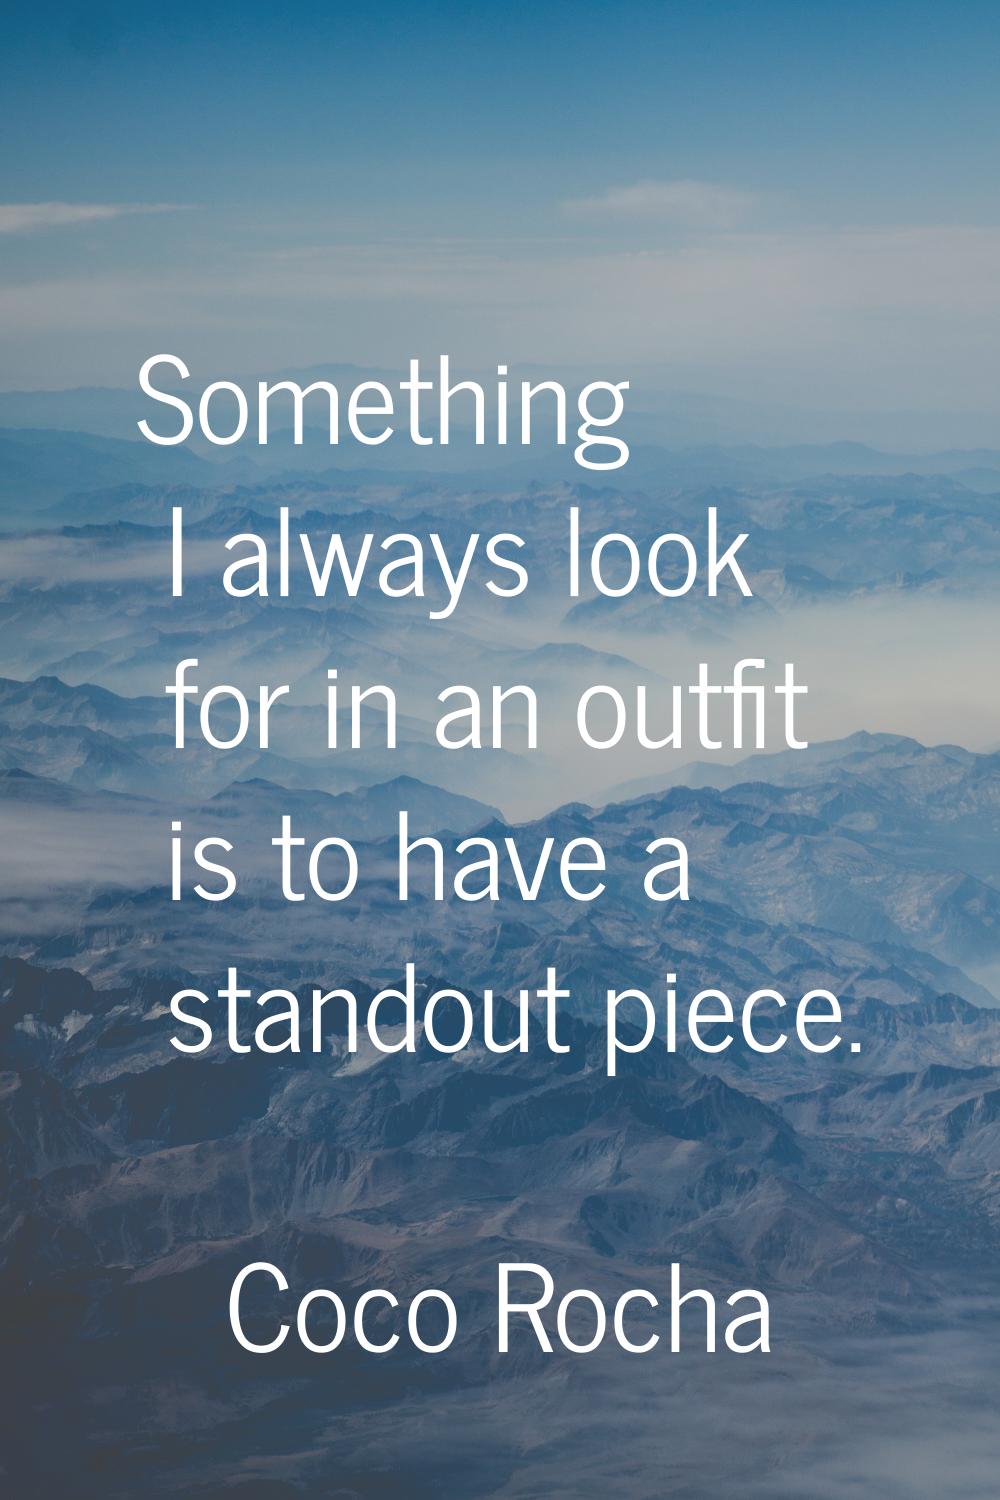 Something I always look for in an outfit is to have a standout piece.